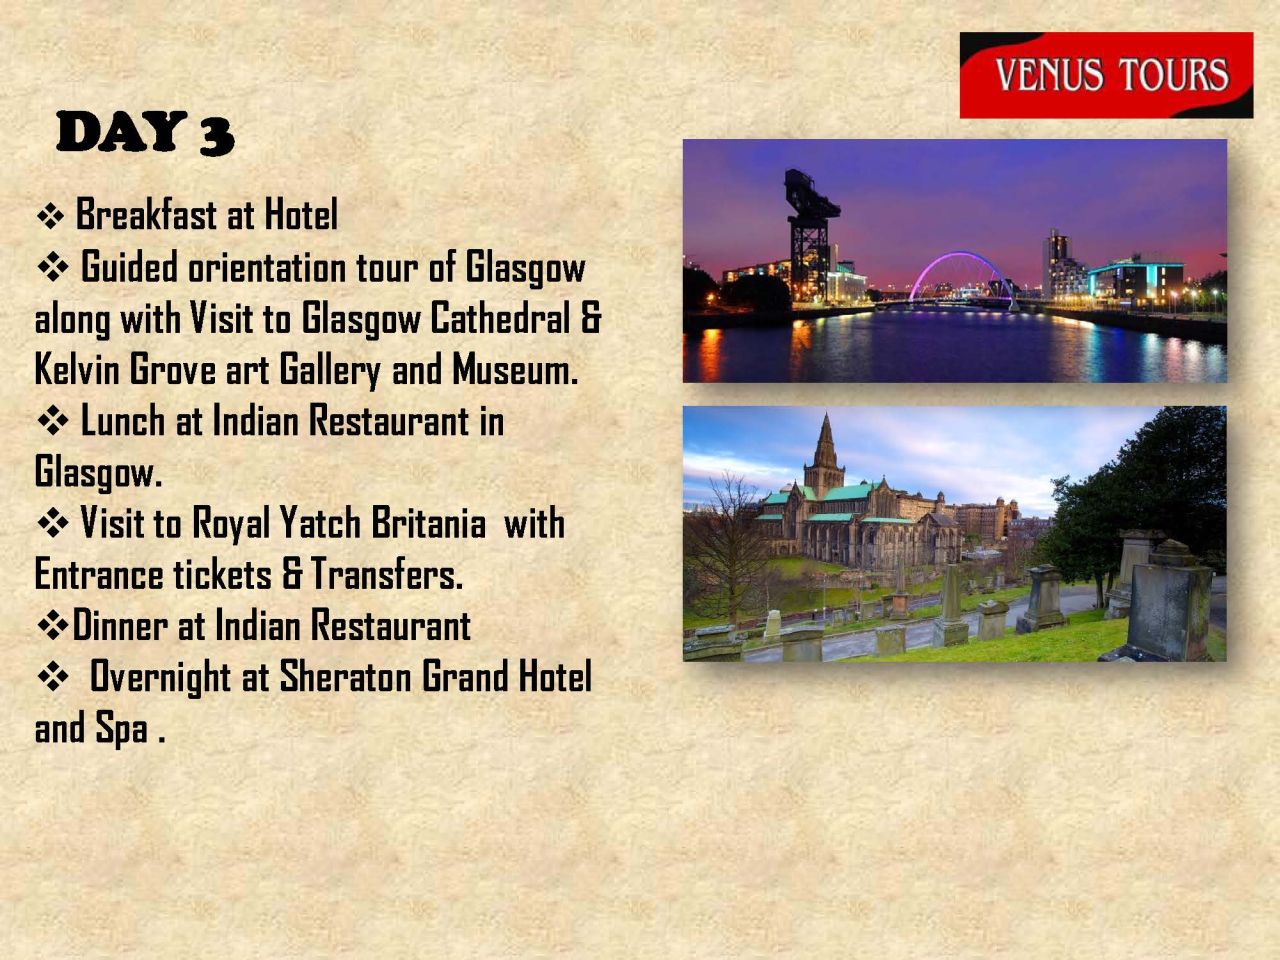 BOUNDLESS BRITAIN CHECK IN 19 JUNE // CHECK OUT 24 JUNE - 05 NIGHTS